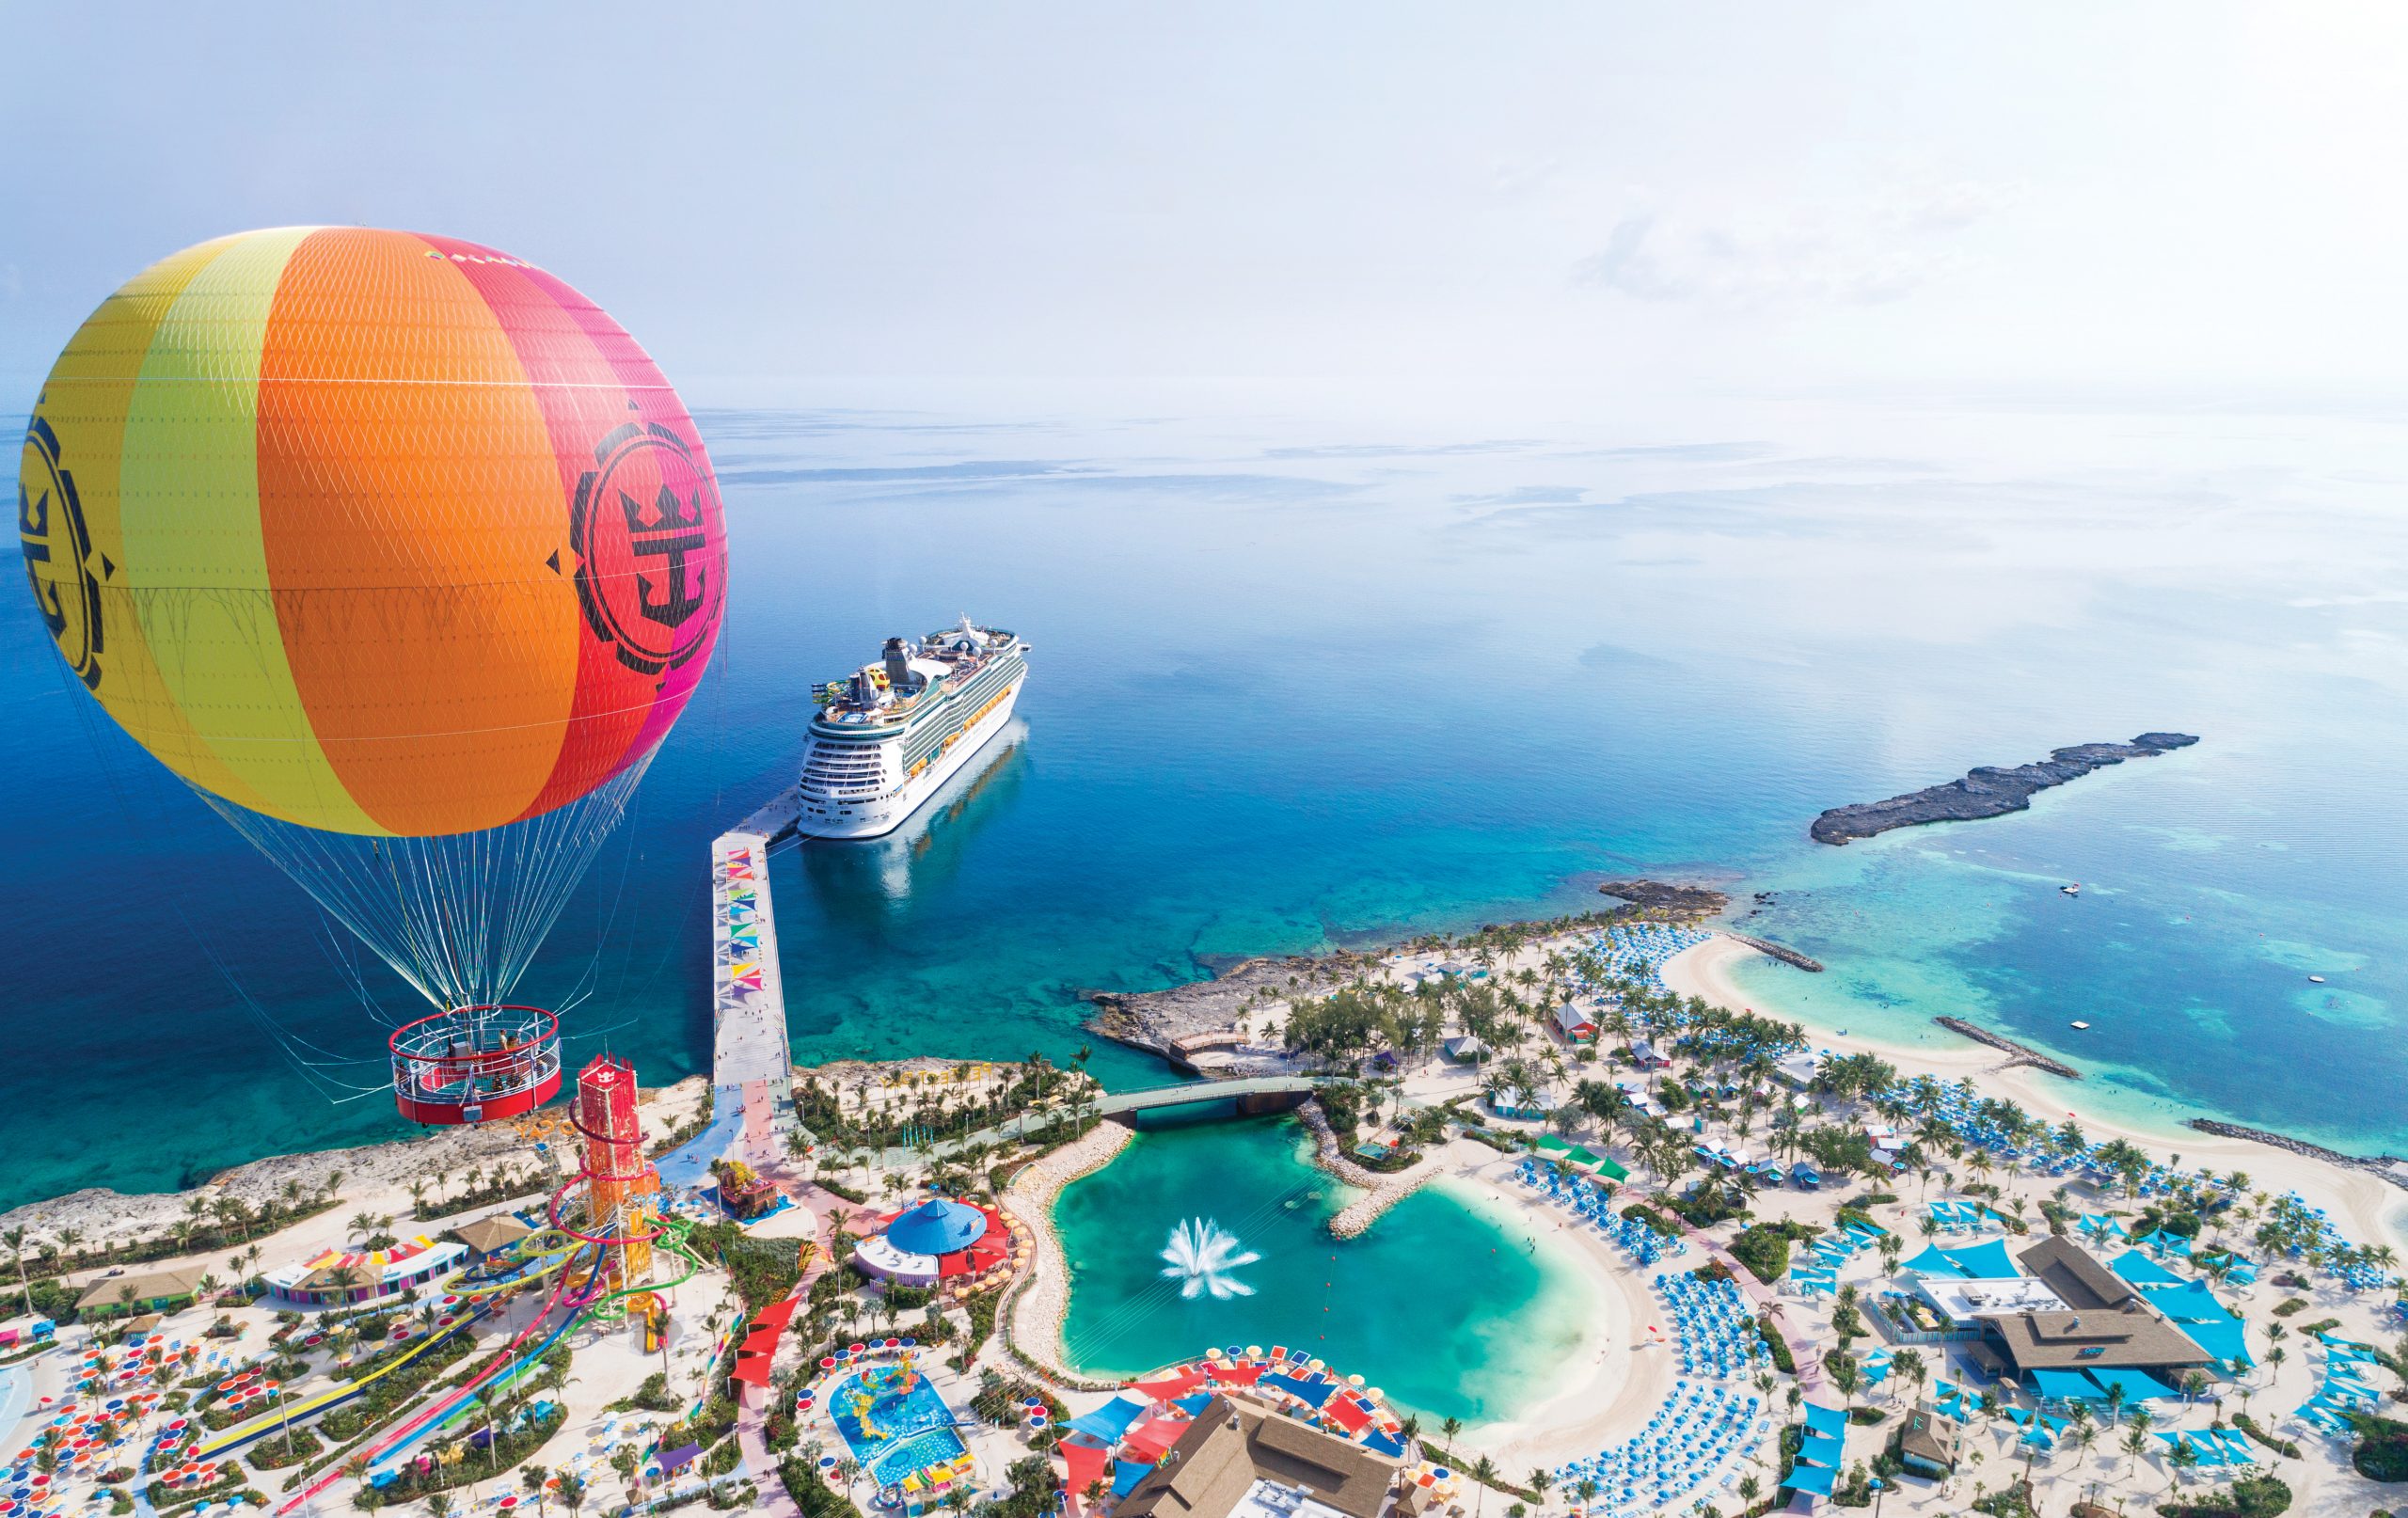 Cruise Destinations - Royal Caribbean's Zipline at Their Private Island Perfect Day at Coco Cay